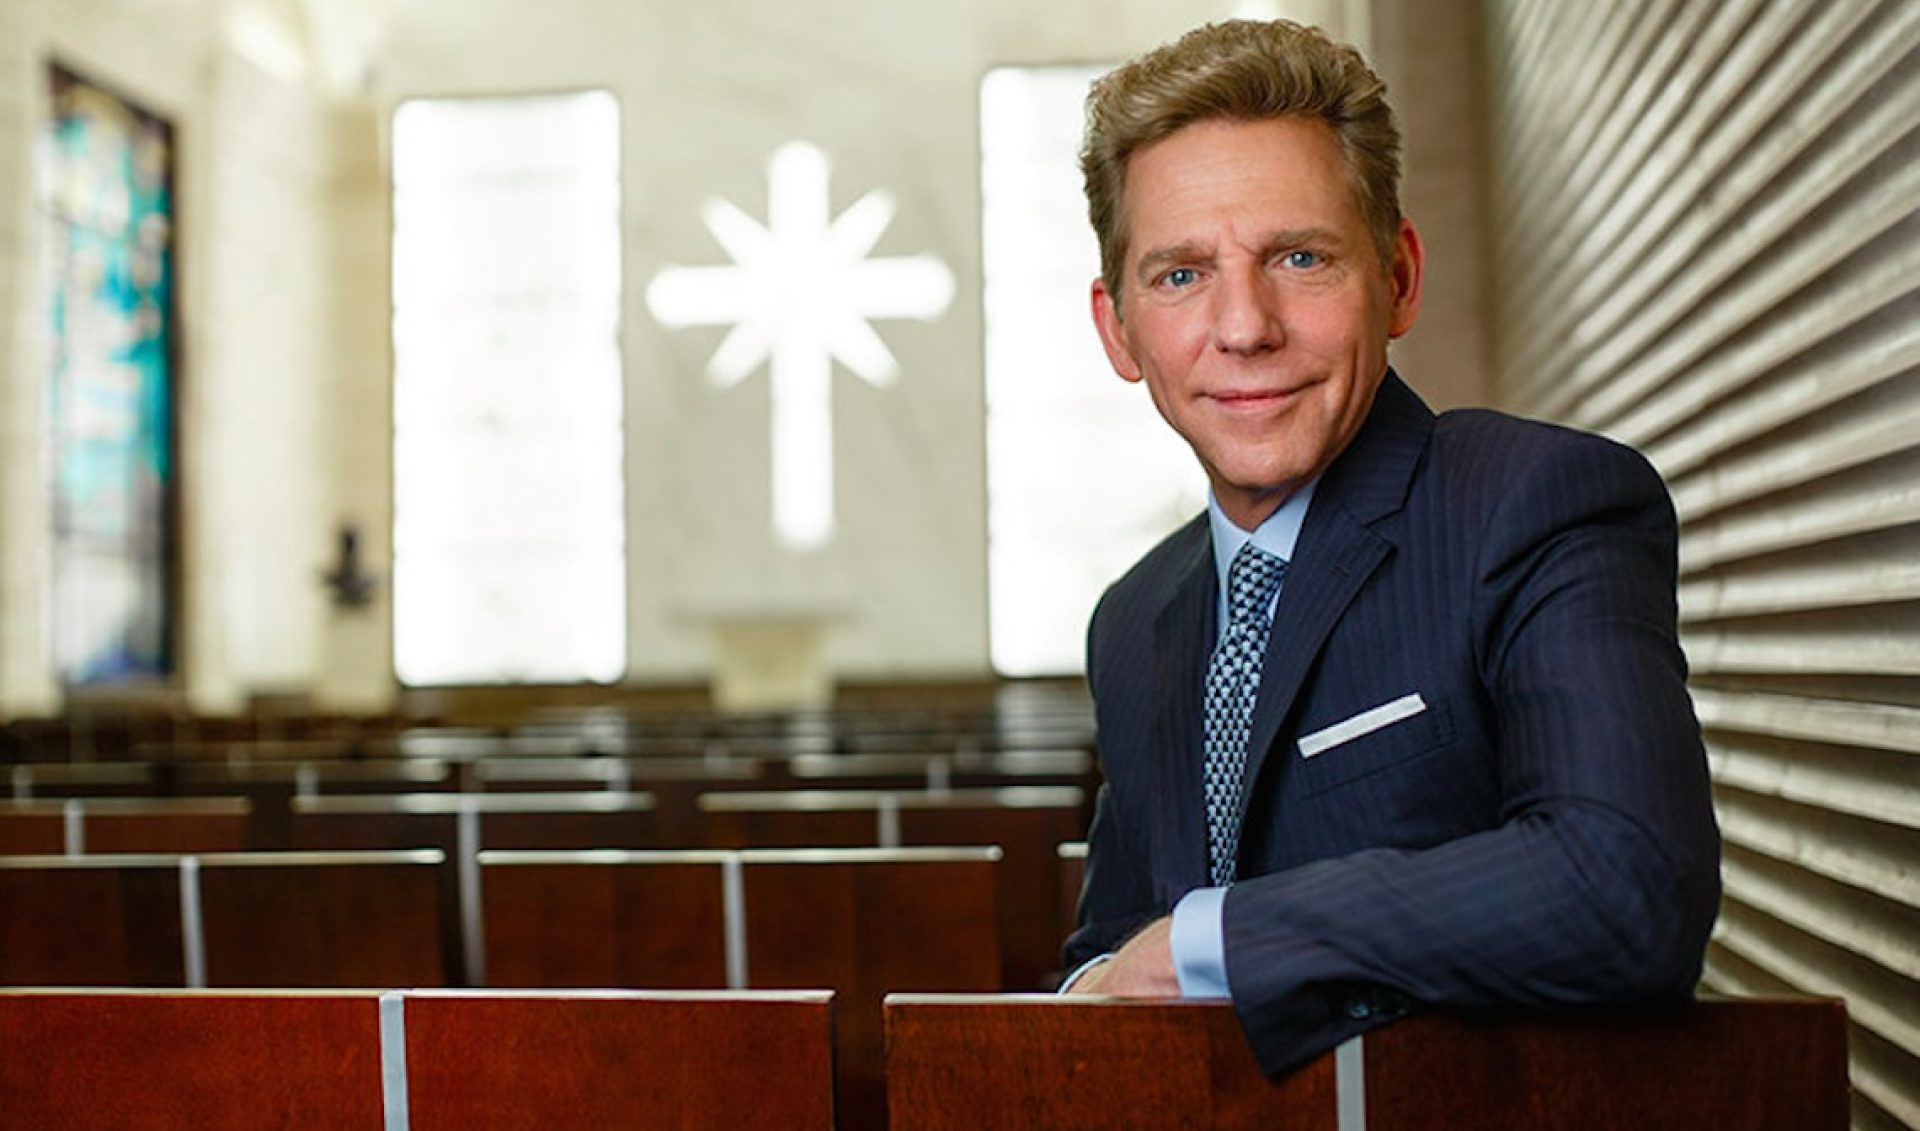 New Scientology TV Network Says It Doesn’t Want To “Convert You”